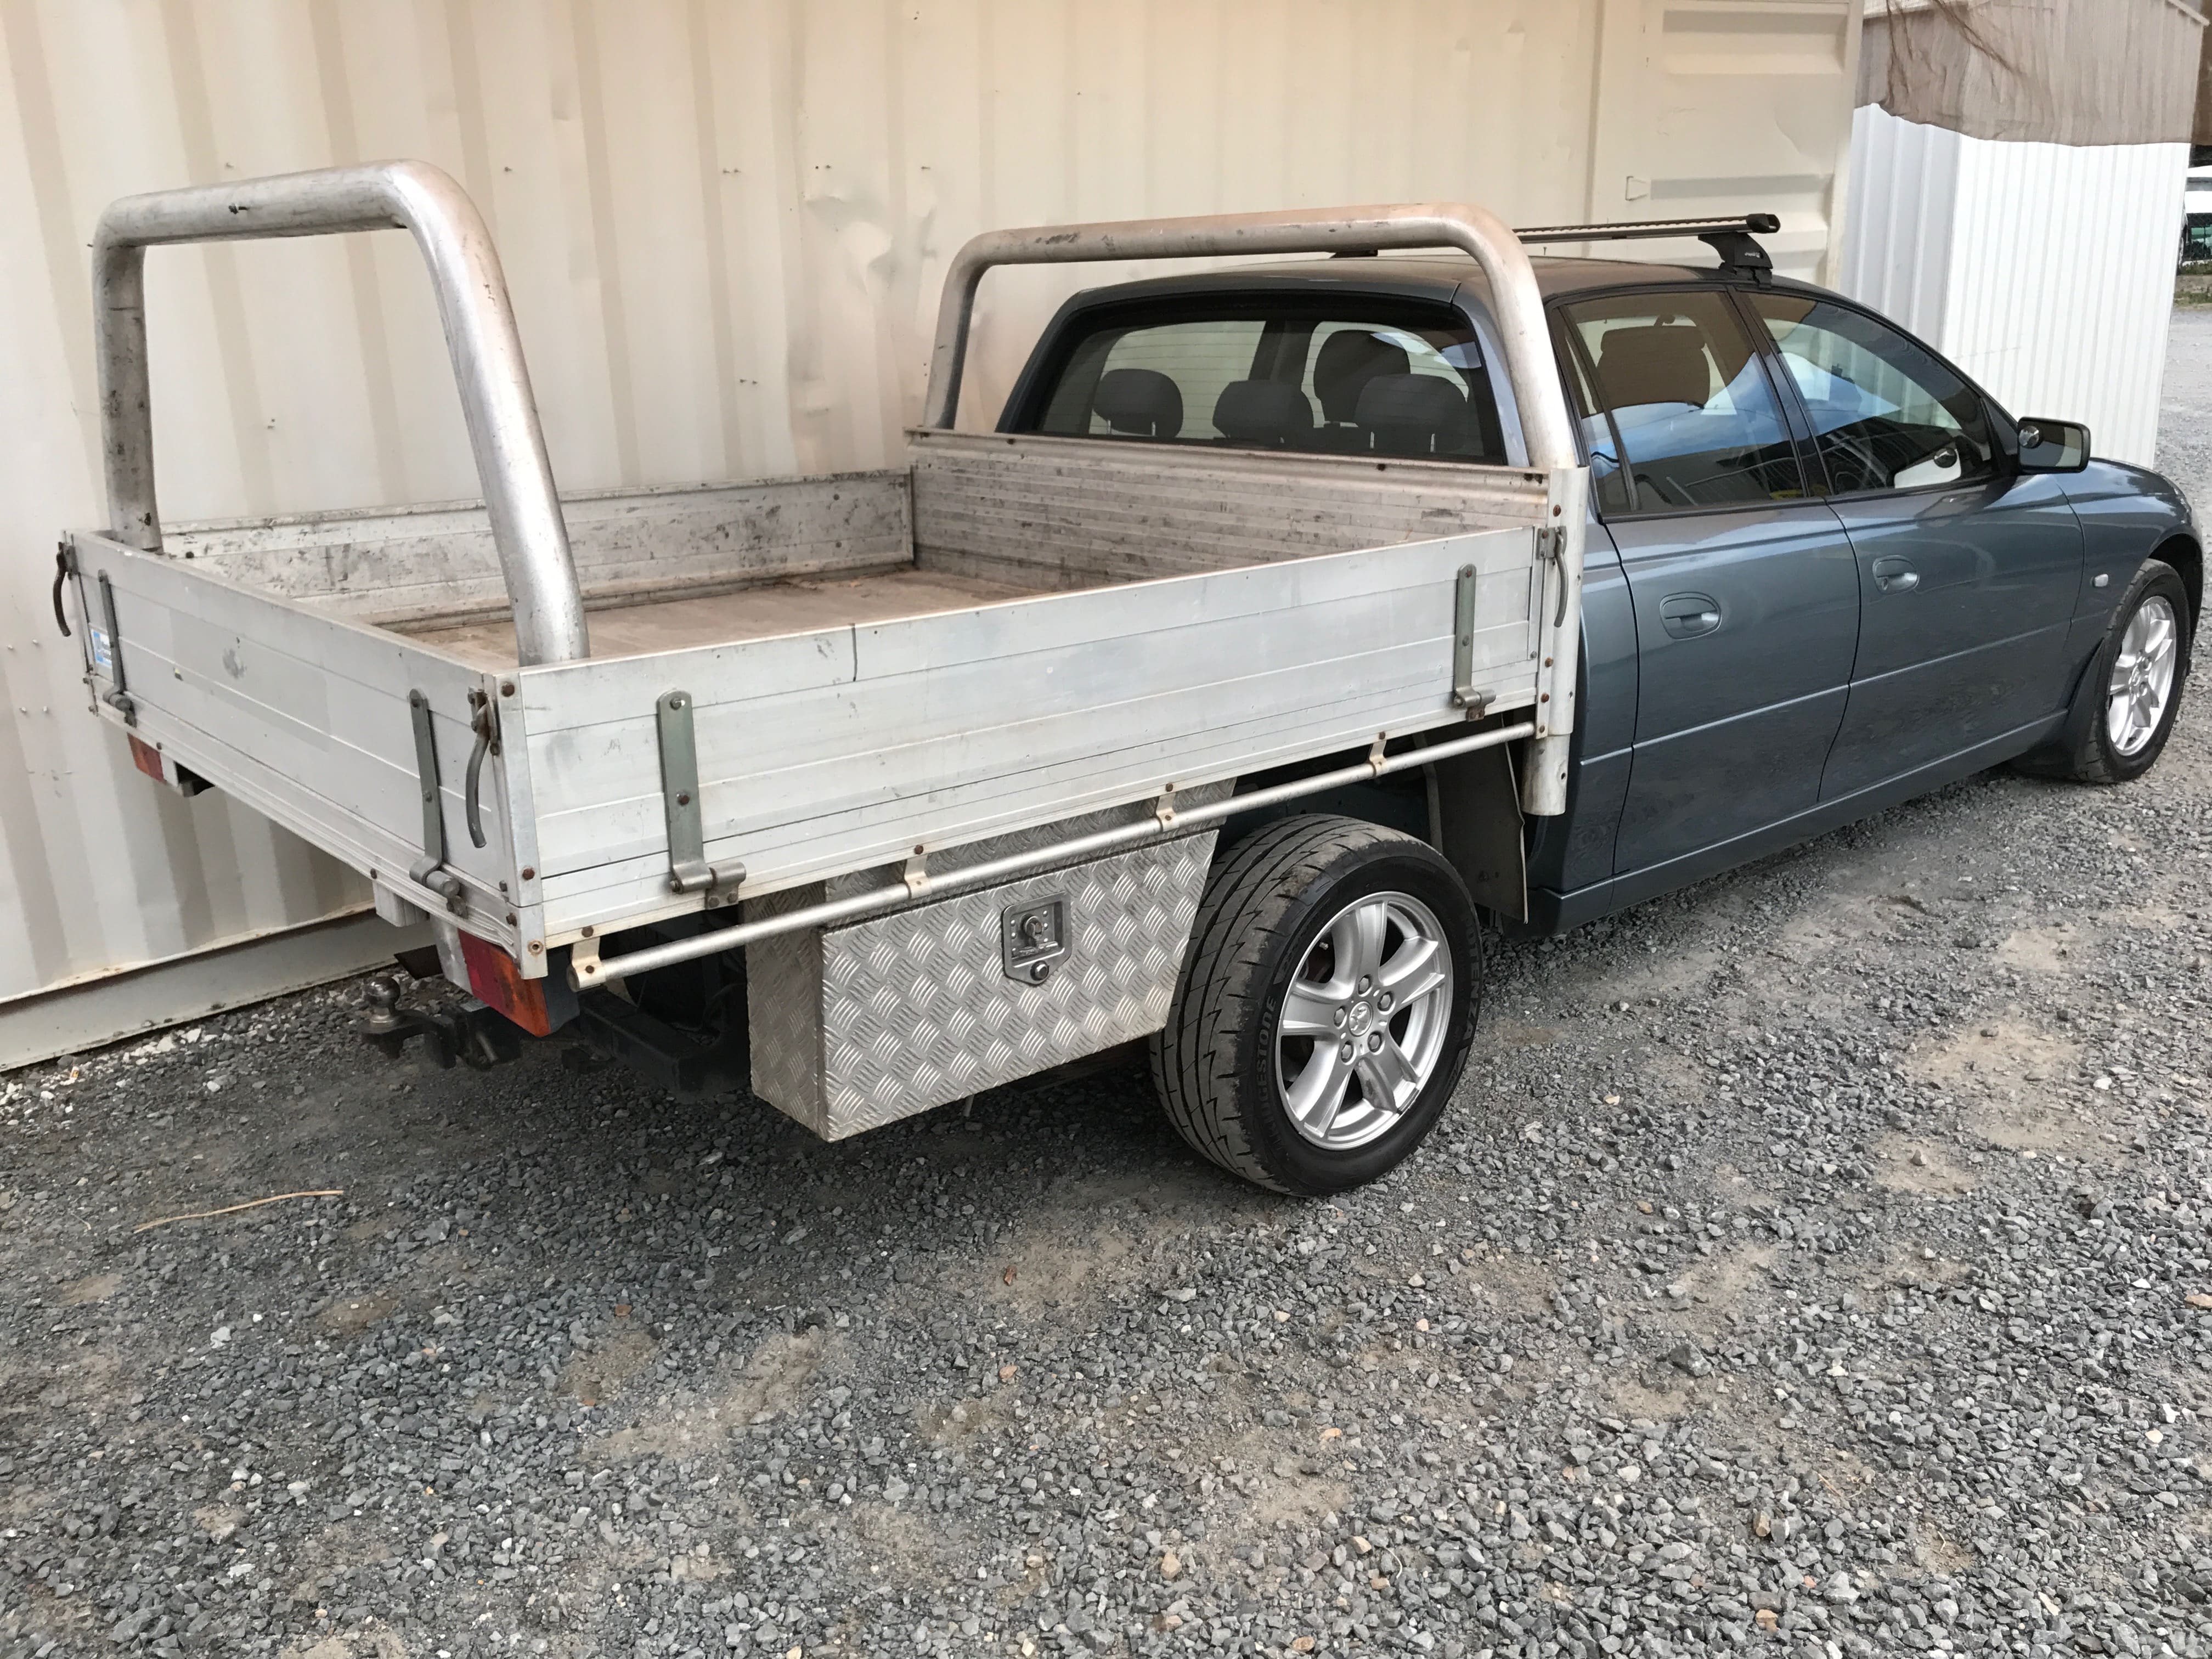 Holden Commodore VY Crewman 2005 Alloy Tray for sale 7